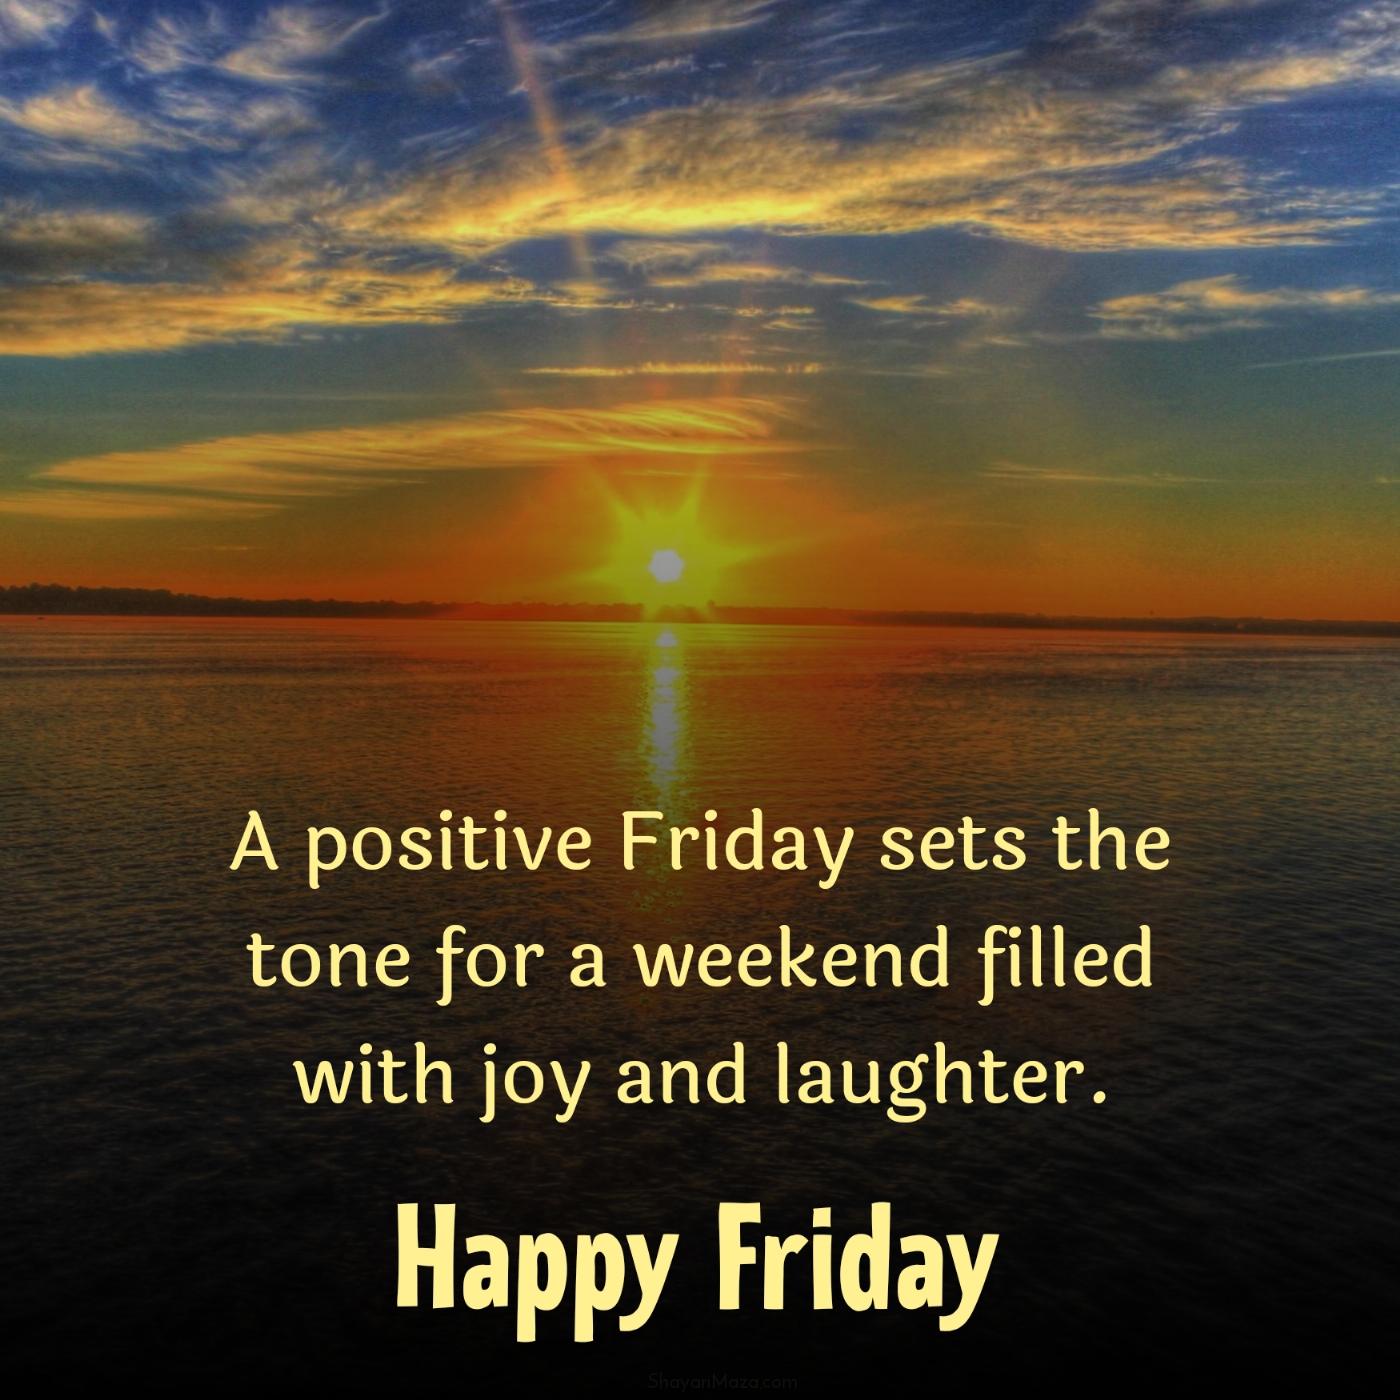 A positive Friday sets the tone for a weekend filled with joy